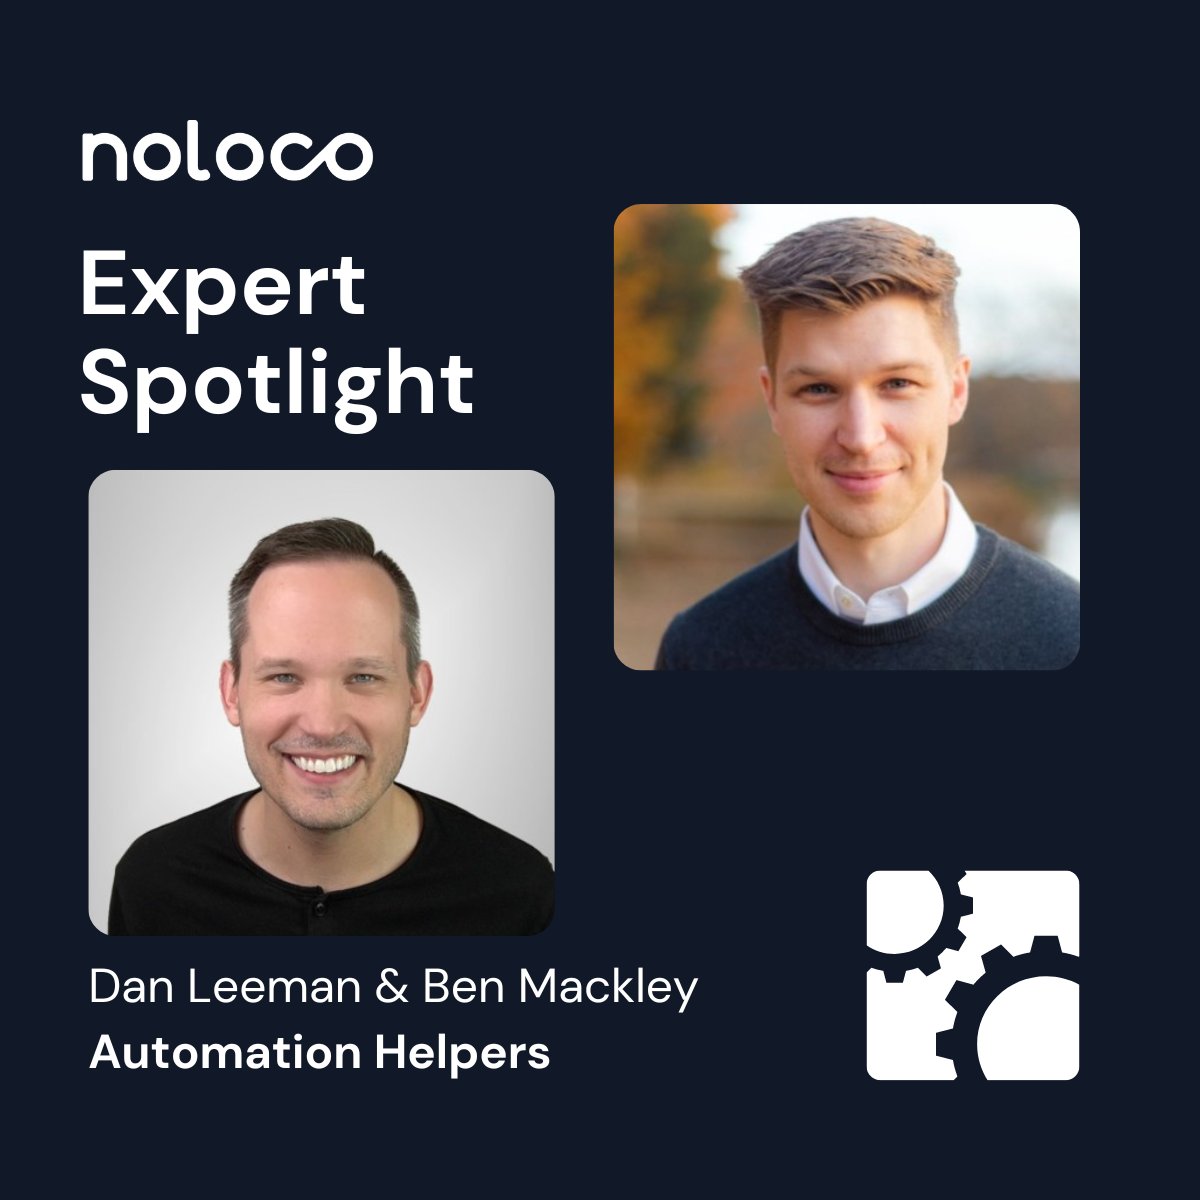 🚀 Meet Ben and Dan from Automation Helpers! As Noloco partners, they're empowering business with no-code solutions. 'Our mission is to democratize technology,' says Ben.
🔗 Read more: eu1.hubs.ly/H09csQQ0

#ExpertSpotlight #NoCode #Noloco #AutomationHelpers